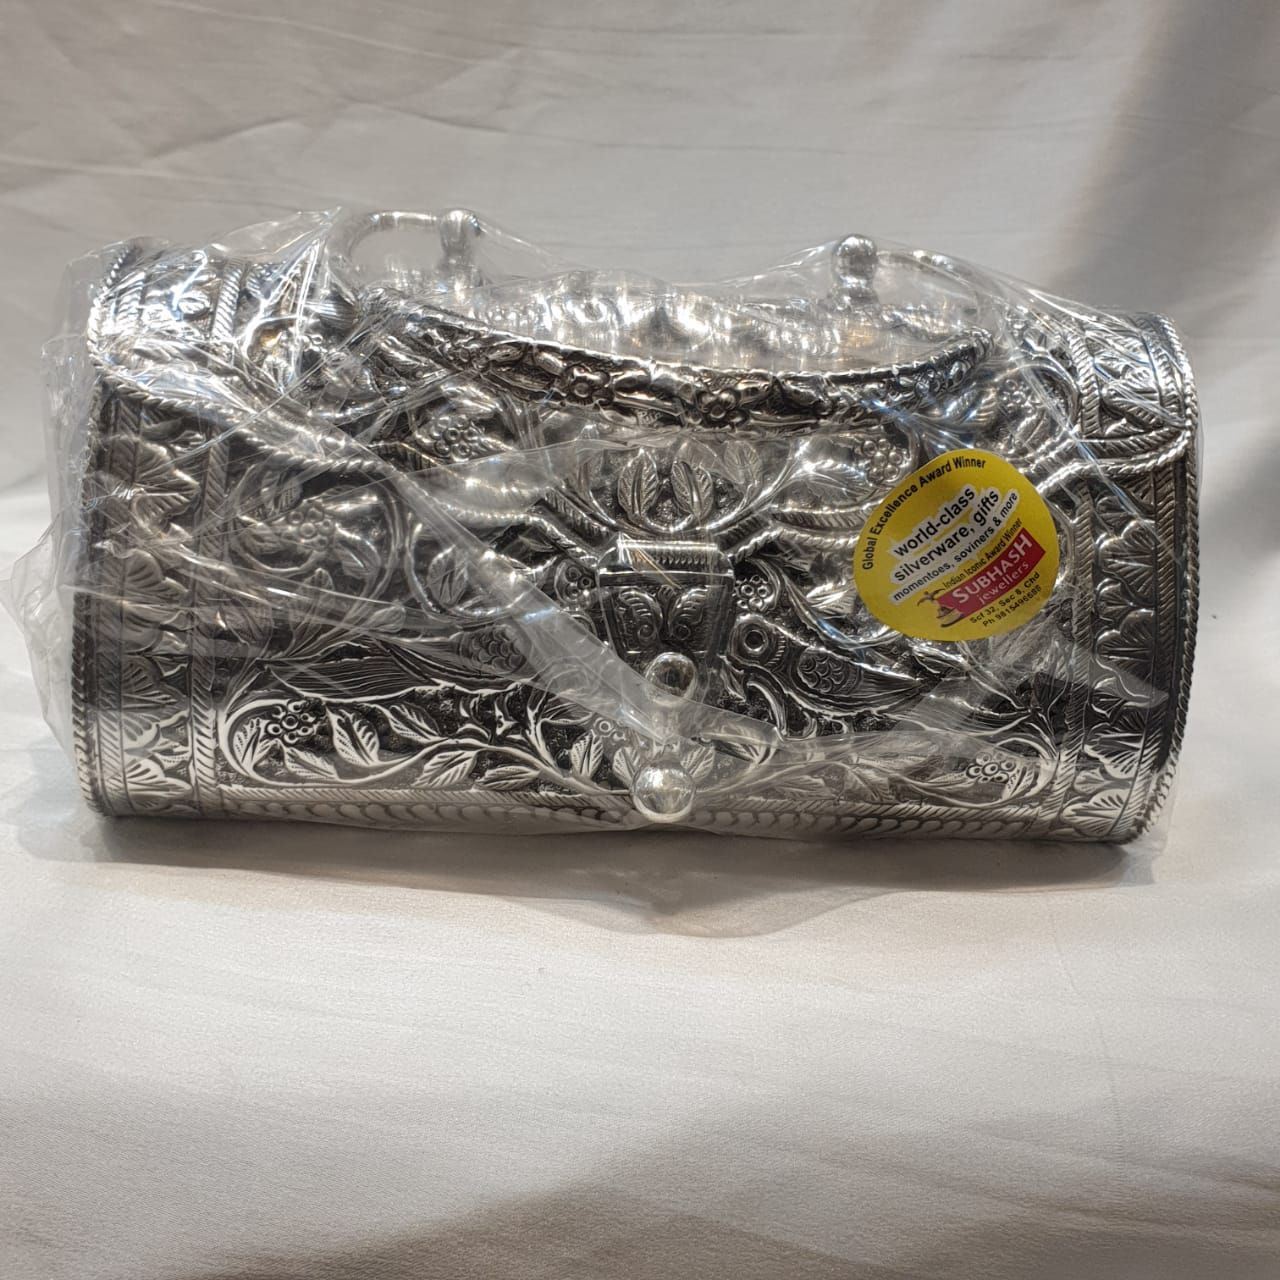 Iconic Silver Clutch